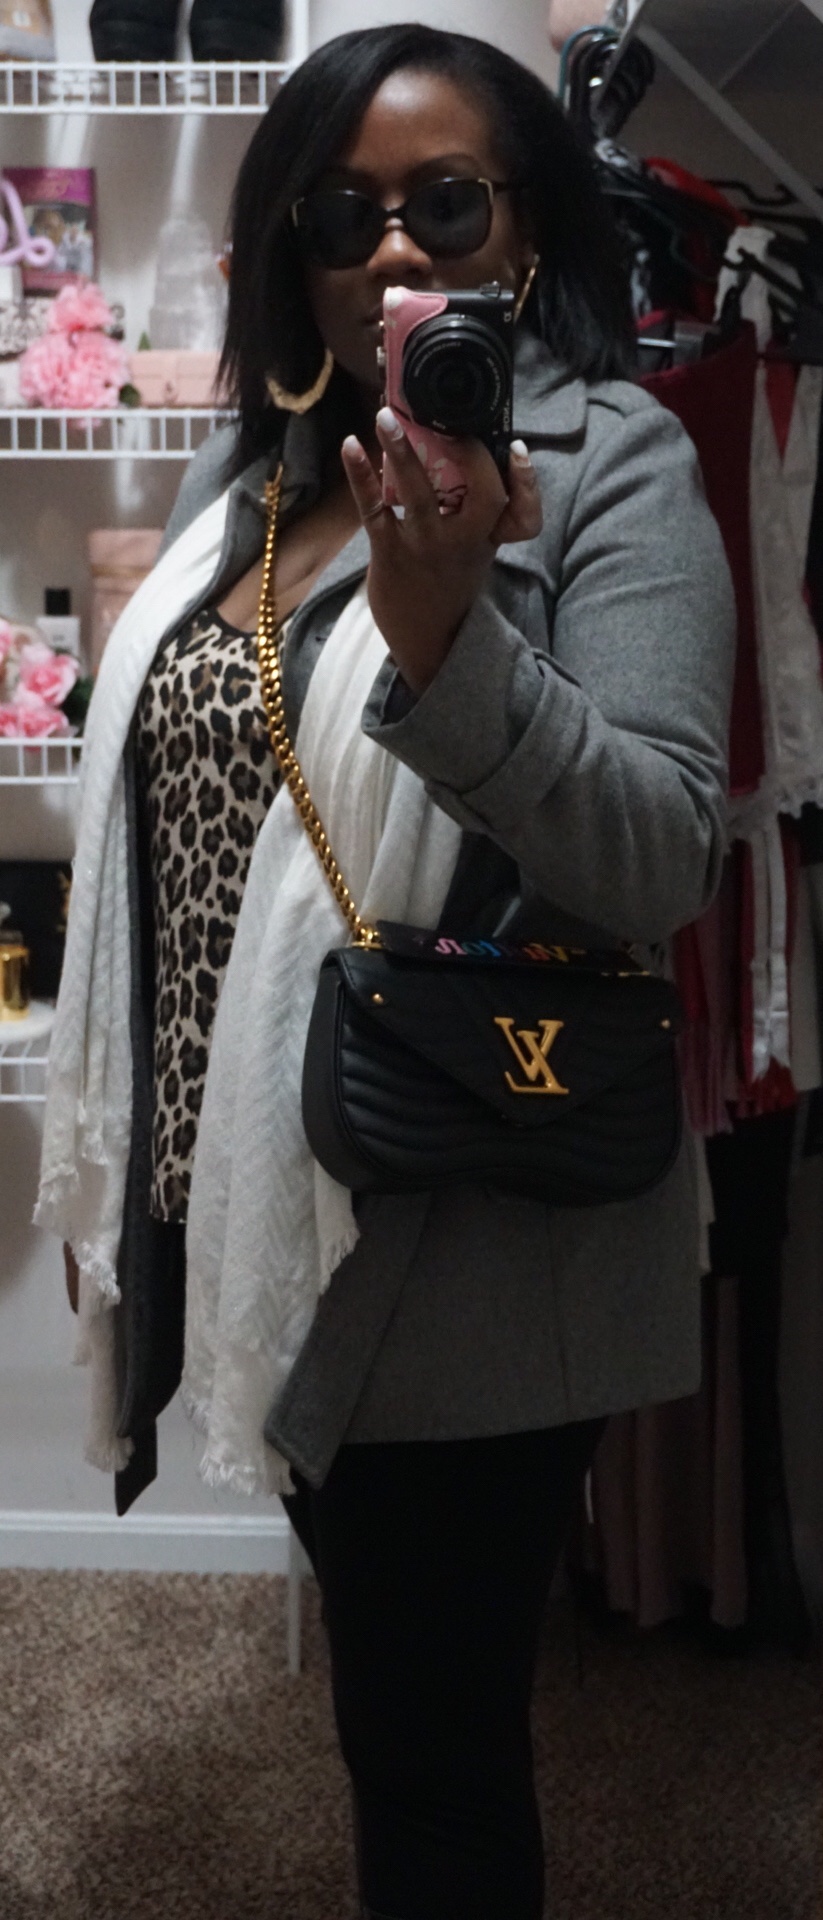 Barbie Girl Ft. My Louis Vuitton New Wave Chain Bag, Outfit Of The Day